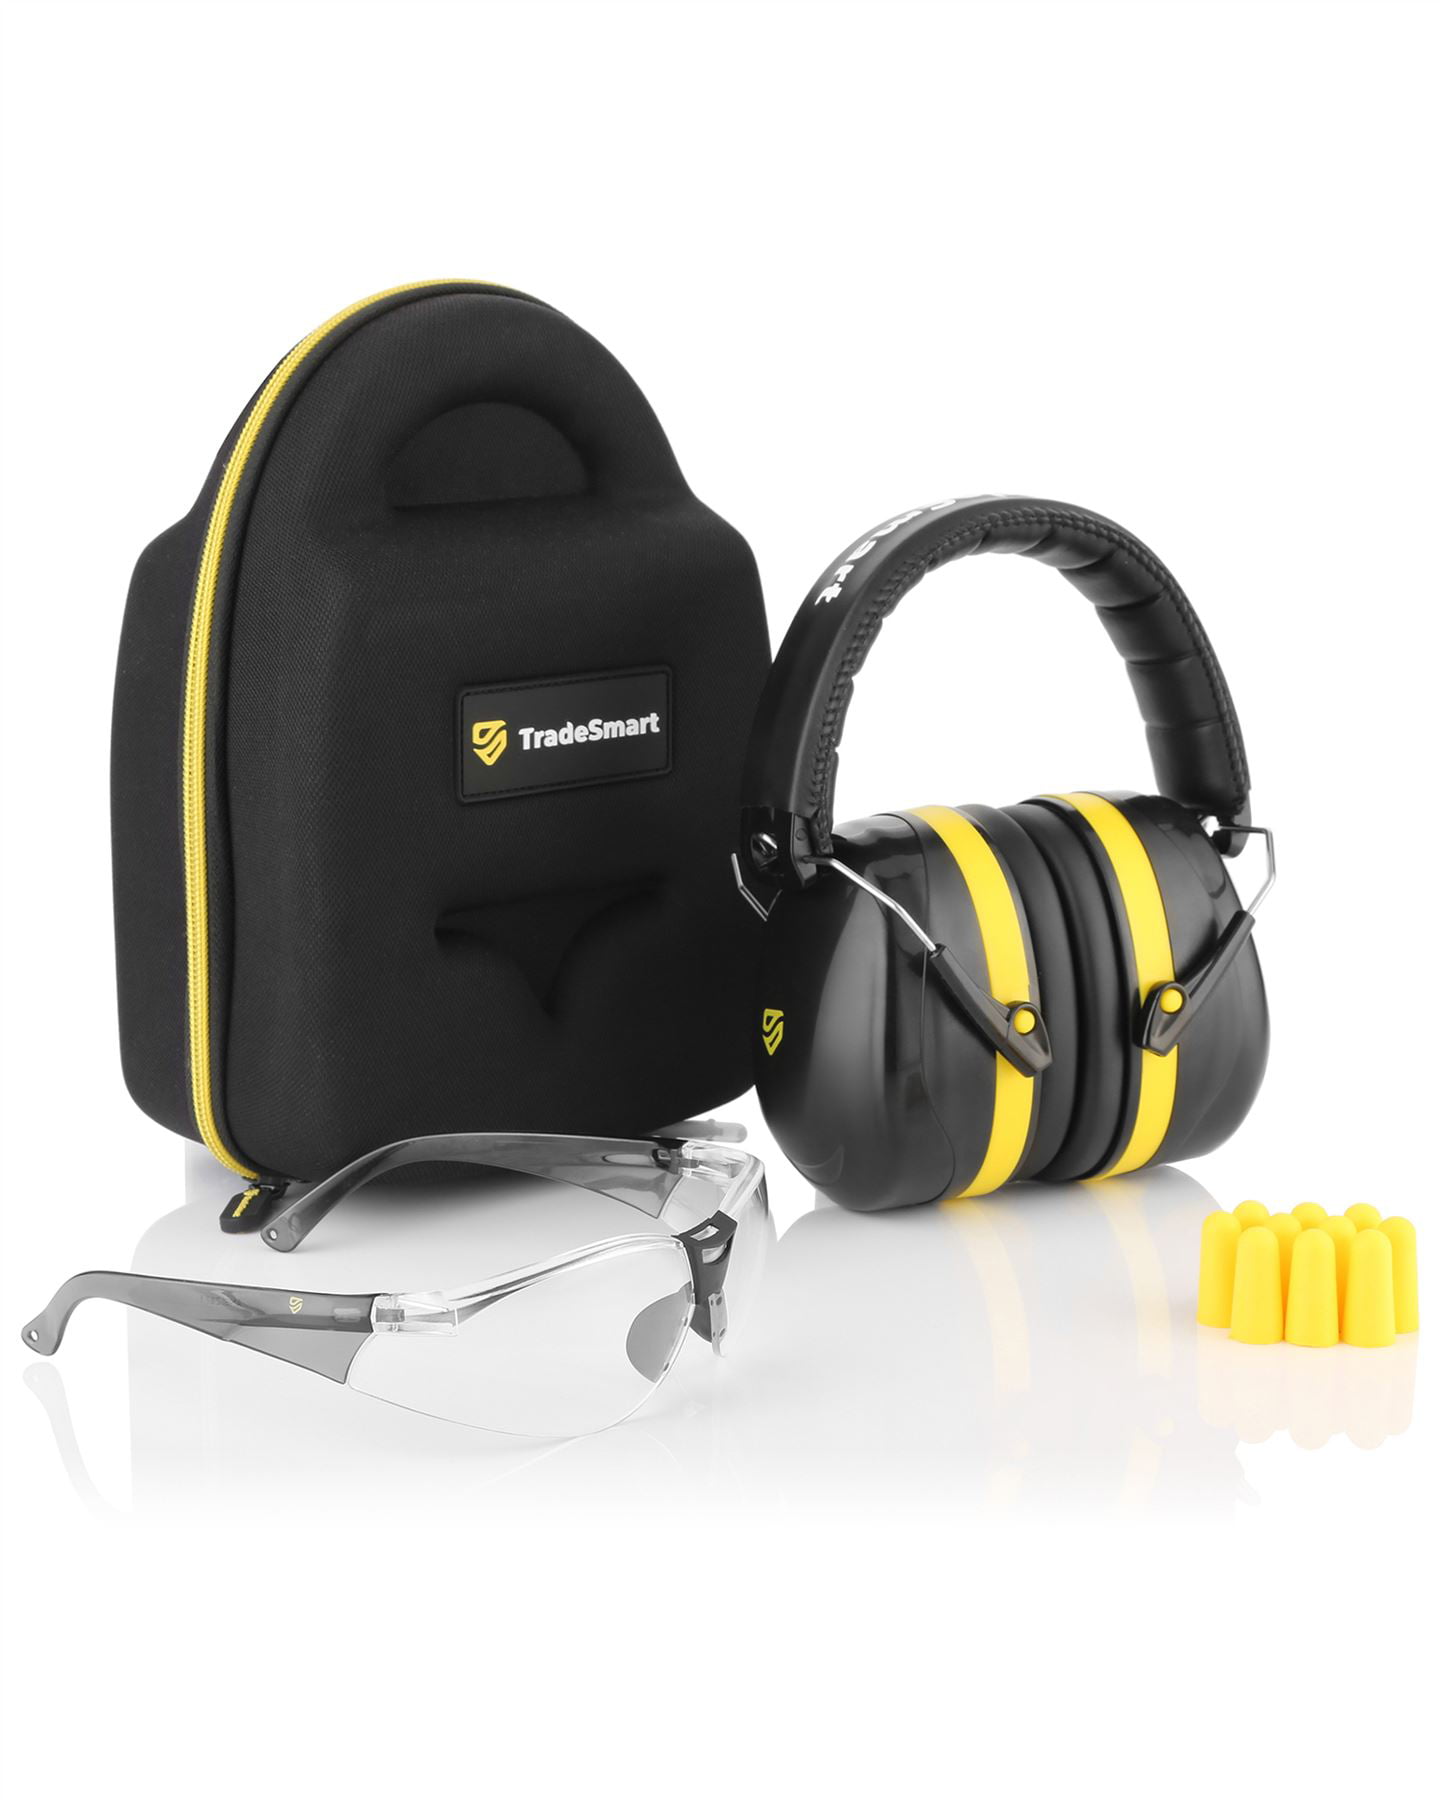 Titus™ Low Profile Ear Muffs w/ Case 34 NRR Shooting Range Hearing Protection